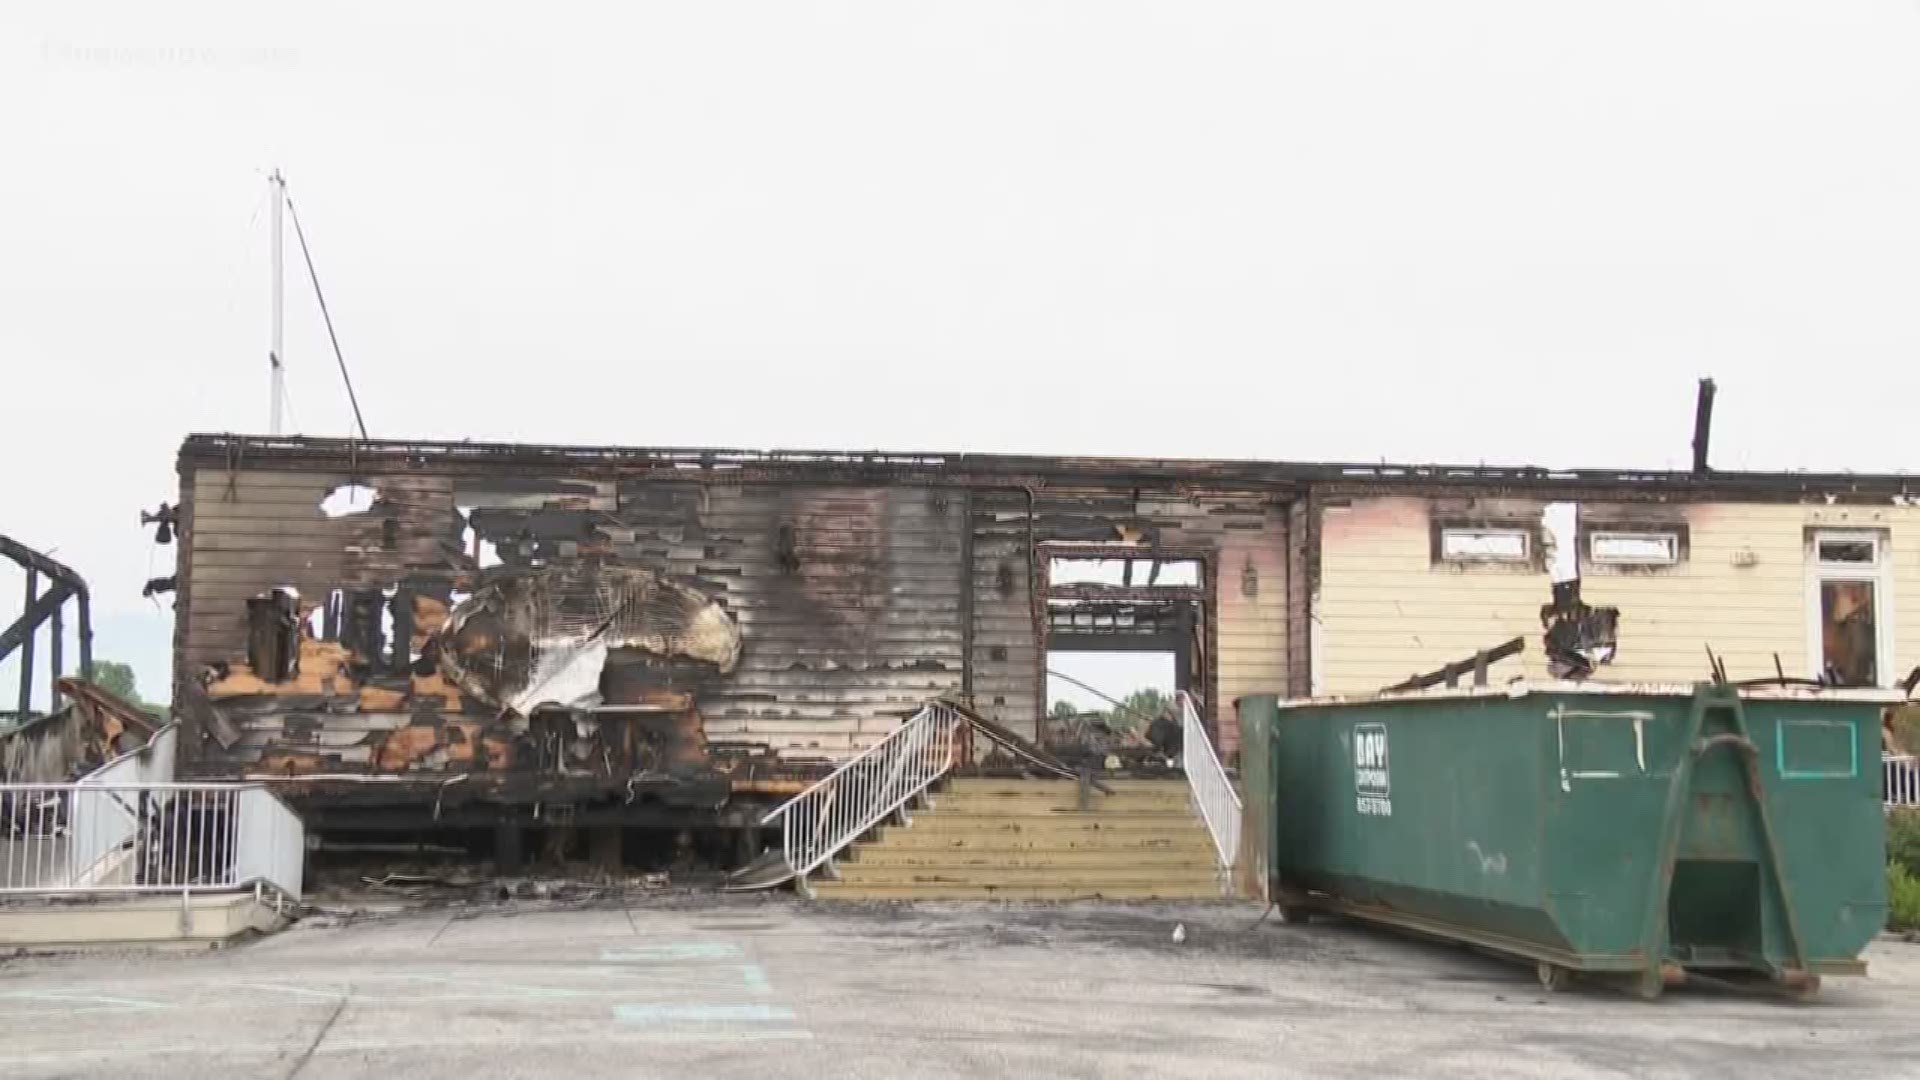 Flames tore through the restaurant Wednesday morning destroying the restaurant and damaging nearby boats.